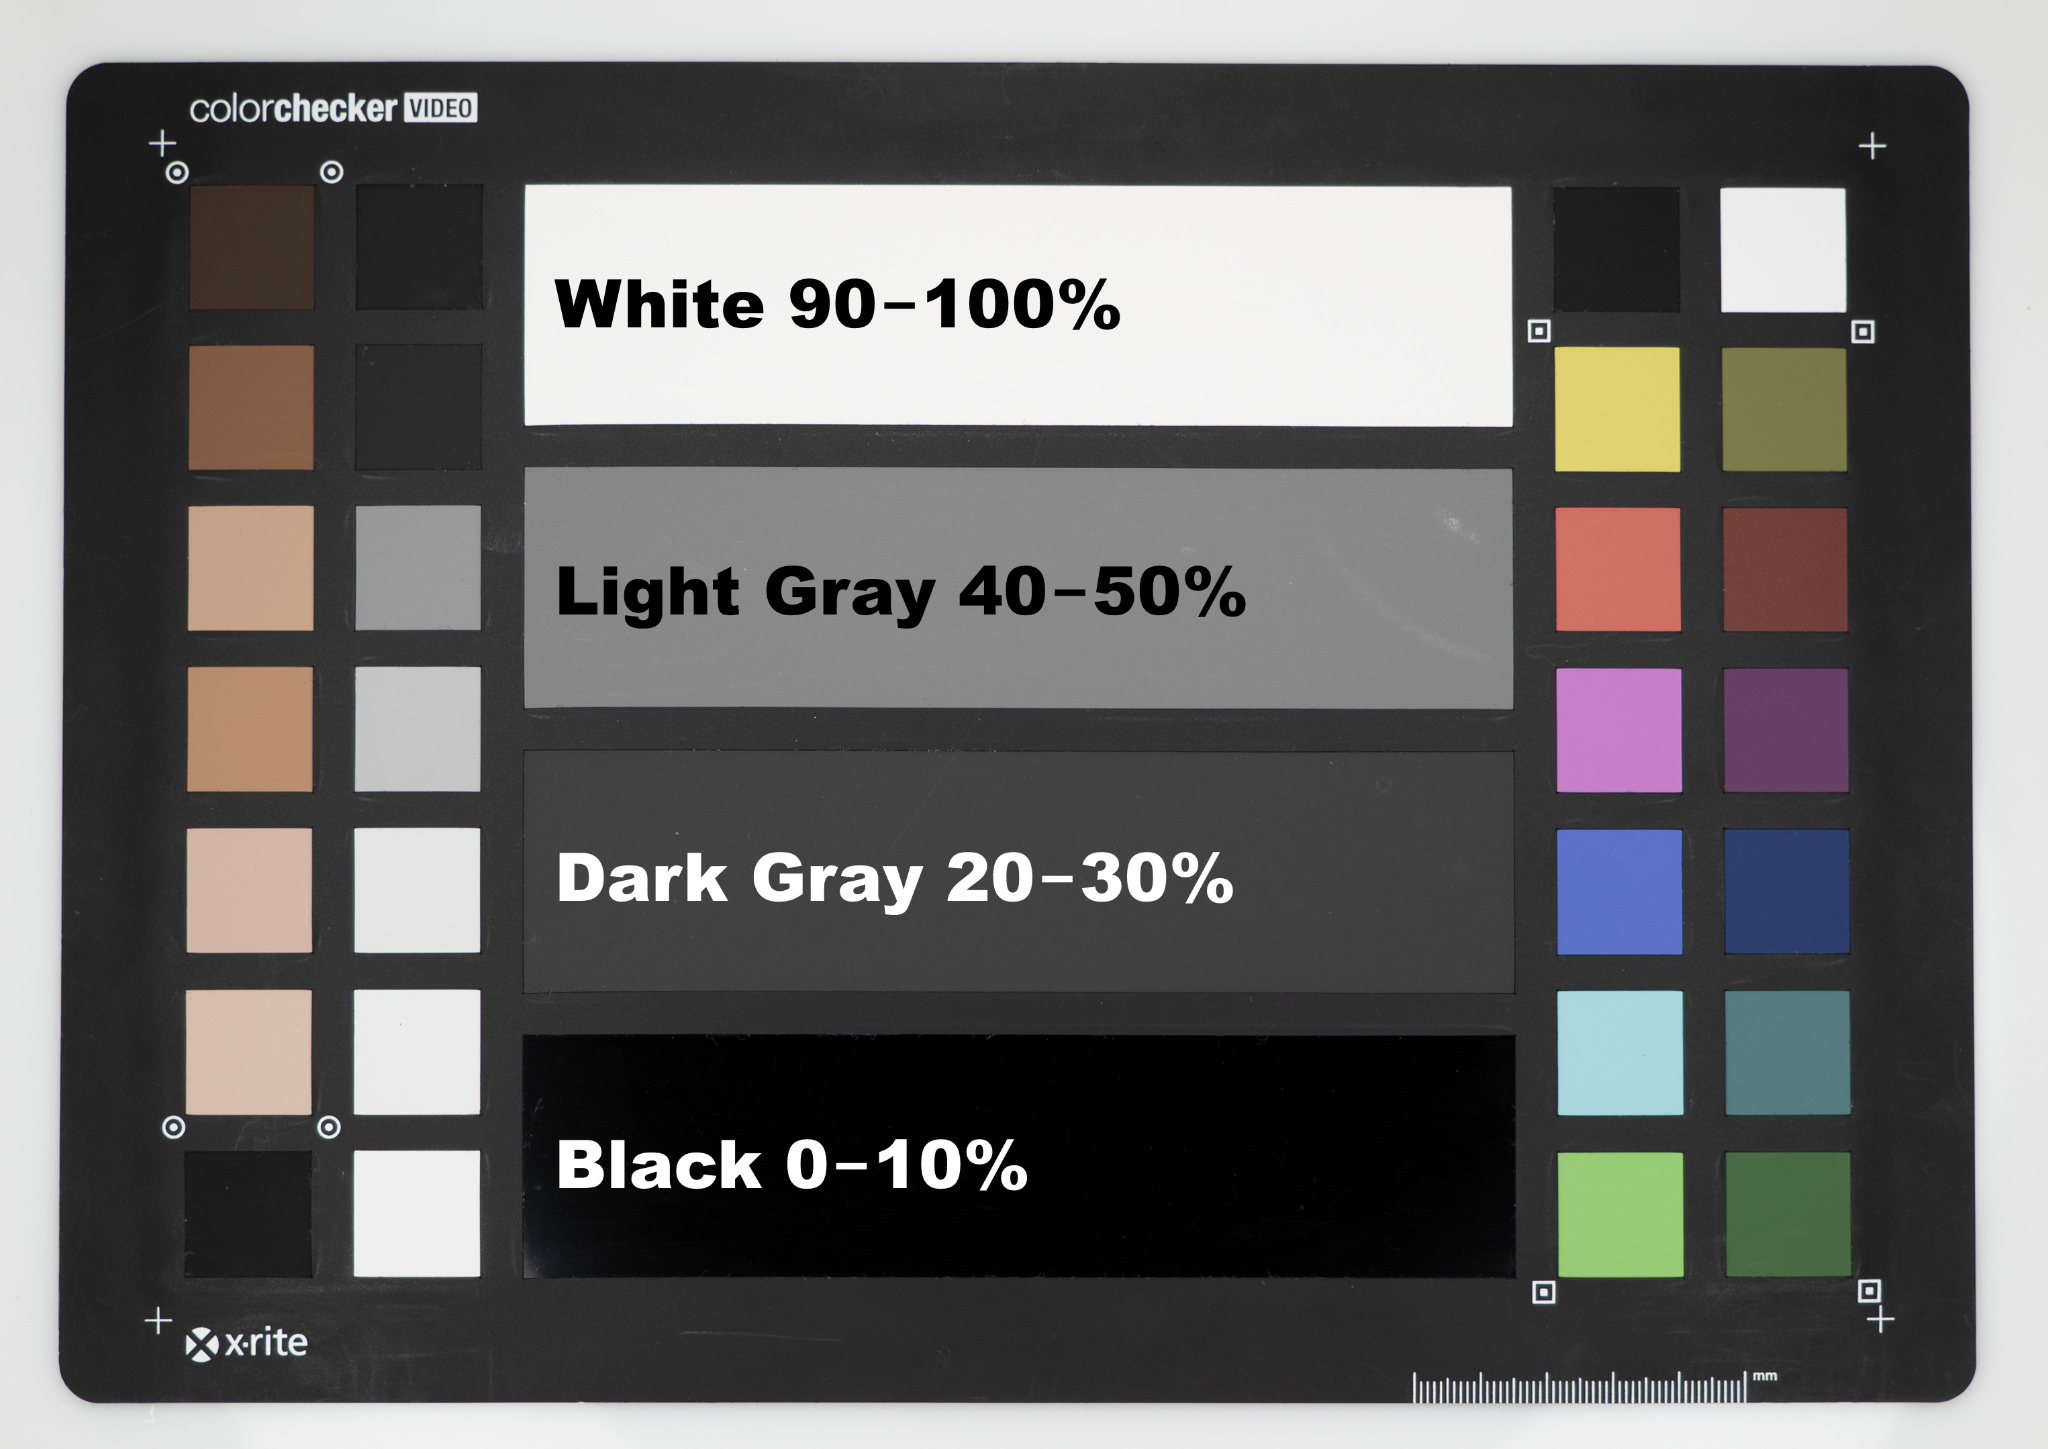 X-Rite Color Checker Video with IRE and % percentage levels. White = 90-100% or 90-100 IRE, Light Grey Gray = 40-50% or 40-50 IRE, Dark Grey Gray = 20-30% or 20-30 IRE, Black = 0-10% or 0-10 IRE